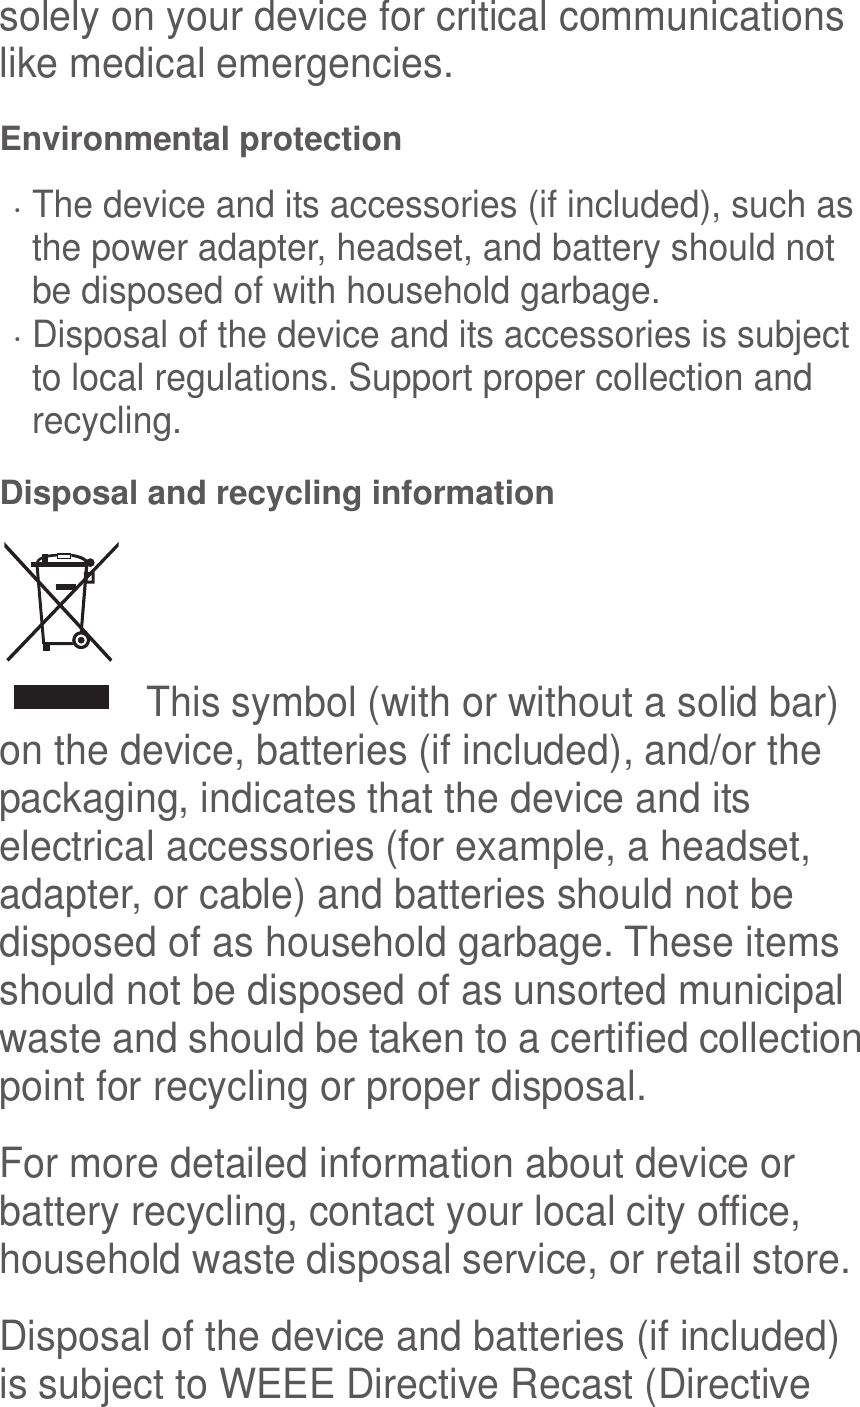  solely on your device for critical communications like medical emergencies. Environmental protection  The device and its accessories (if included), such as the power adapter, headset, and battery should not be disposed of with household garbage.  Disposal of the device and its accessories is subject to local regulations. Support proper collection and recycling. Disposal and recycling information   This symbol (with or without a solid bar) on the device, batteries (if included), and/or the packaging, indicates that the device and its electrical accessories (for example, a headset, adapter, or cable) and batteries should not be disposed of as household garbage. These items should not be disposed of as unsorted municipal waste and should be taken to a certified collection point for recycling or proper disposal. For more detailed information about device or battery recycling, contact your local city office, household waste disposal service, or retail store. Disposal of the device and batteries (if included) is subject to WEEE Directive Recast (Directive 